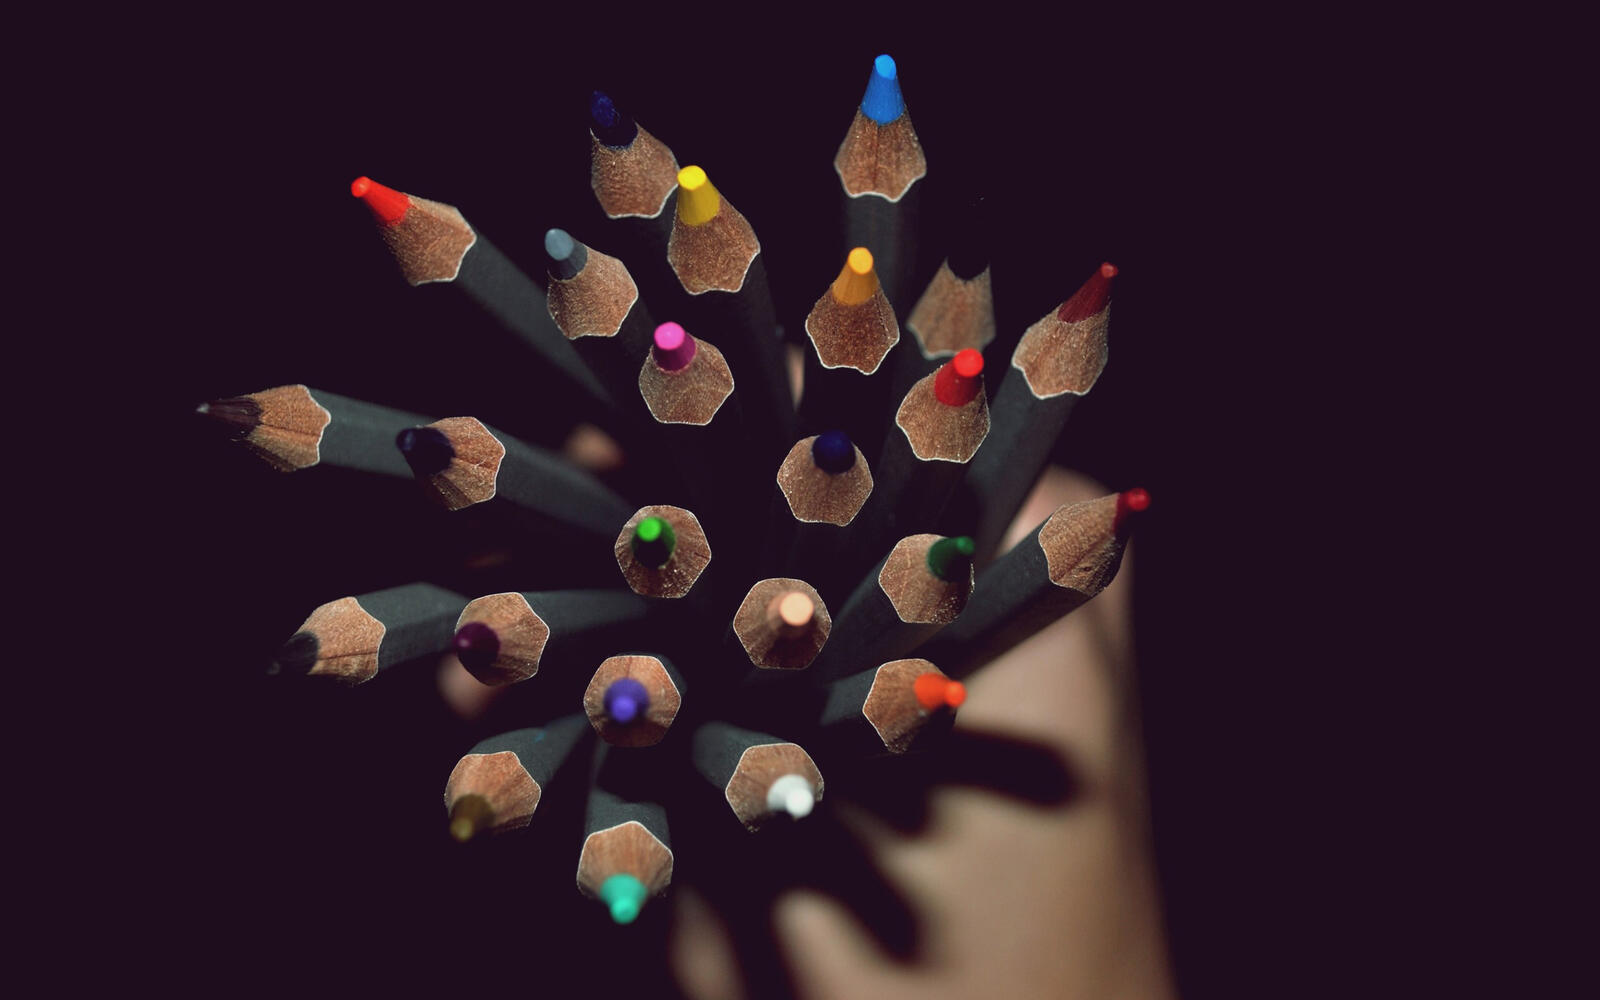 Wallpapers pencils colorful hand on the desktop